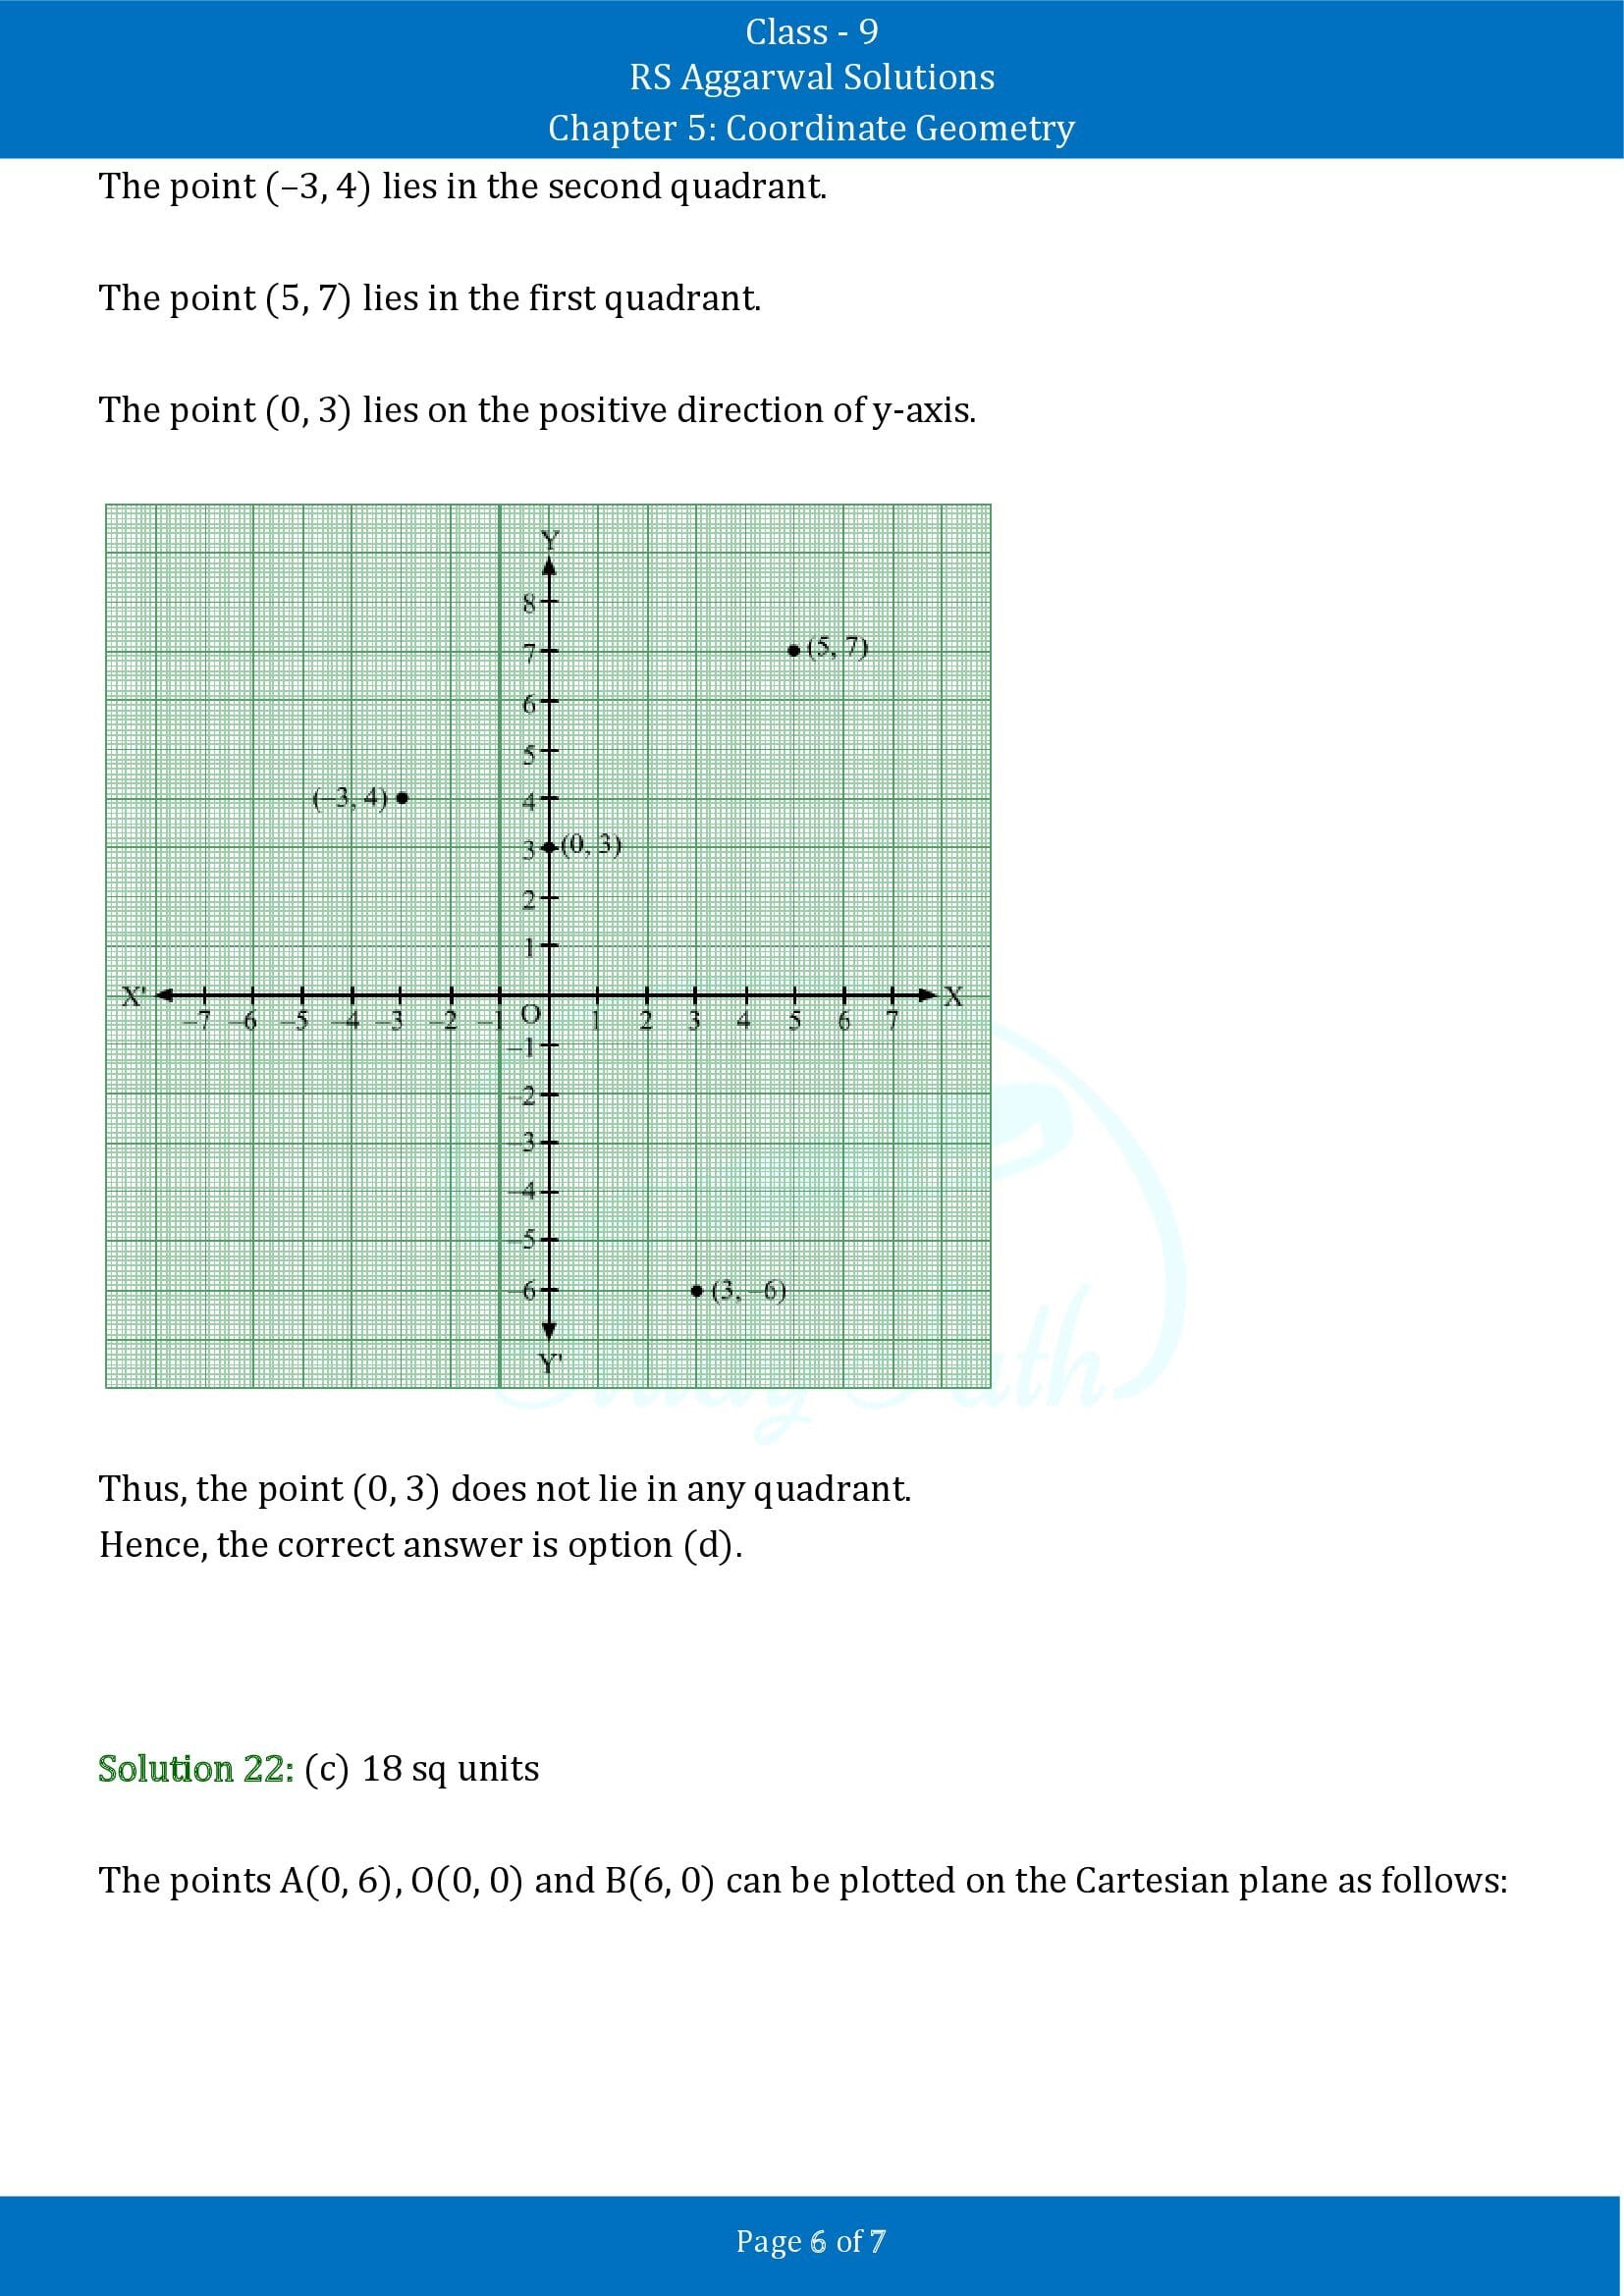 RS Aggarwal Solutions Class 9 Chapter 5 Coordinate Geometry Multiple Choice Questions MCQs 00006